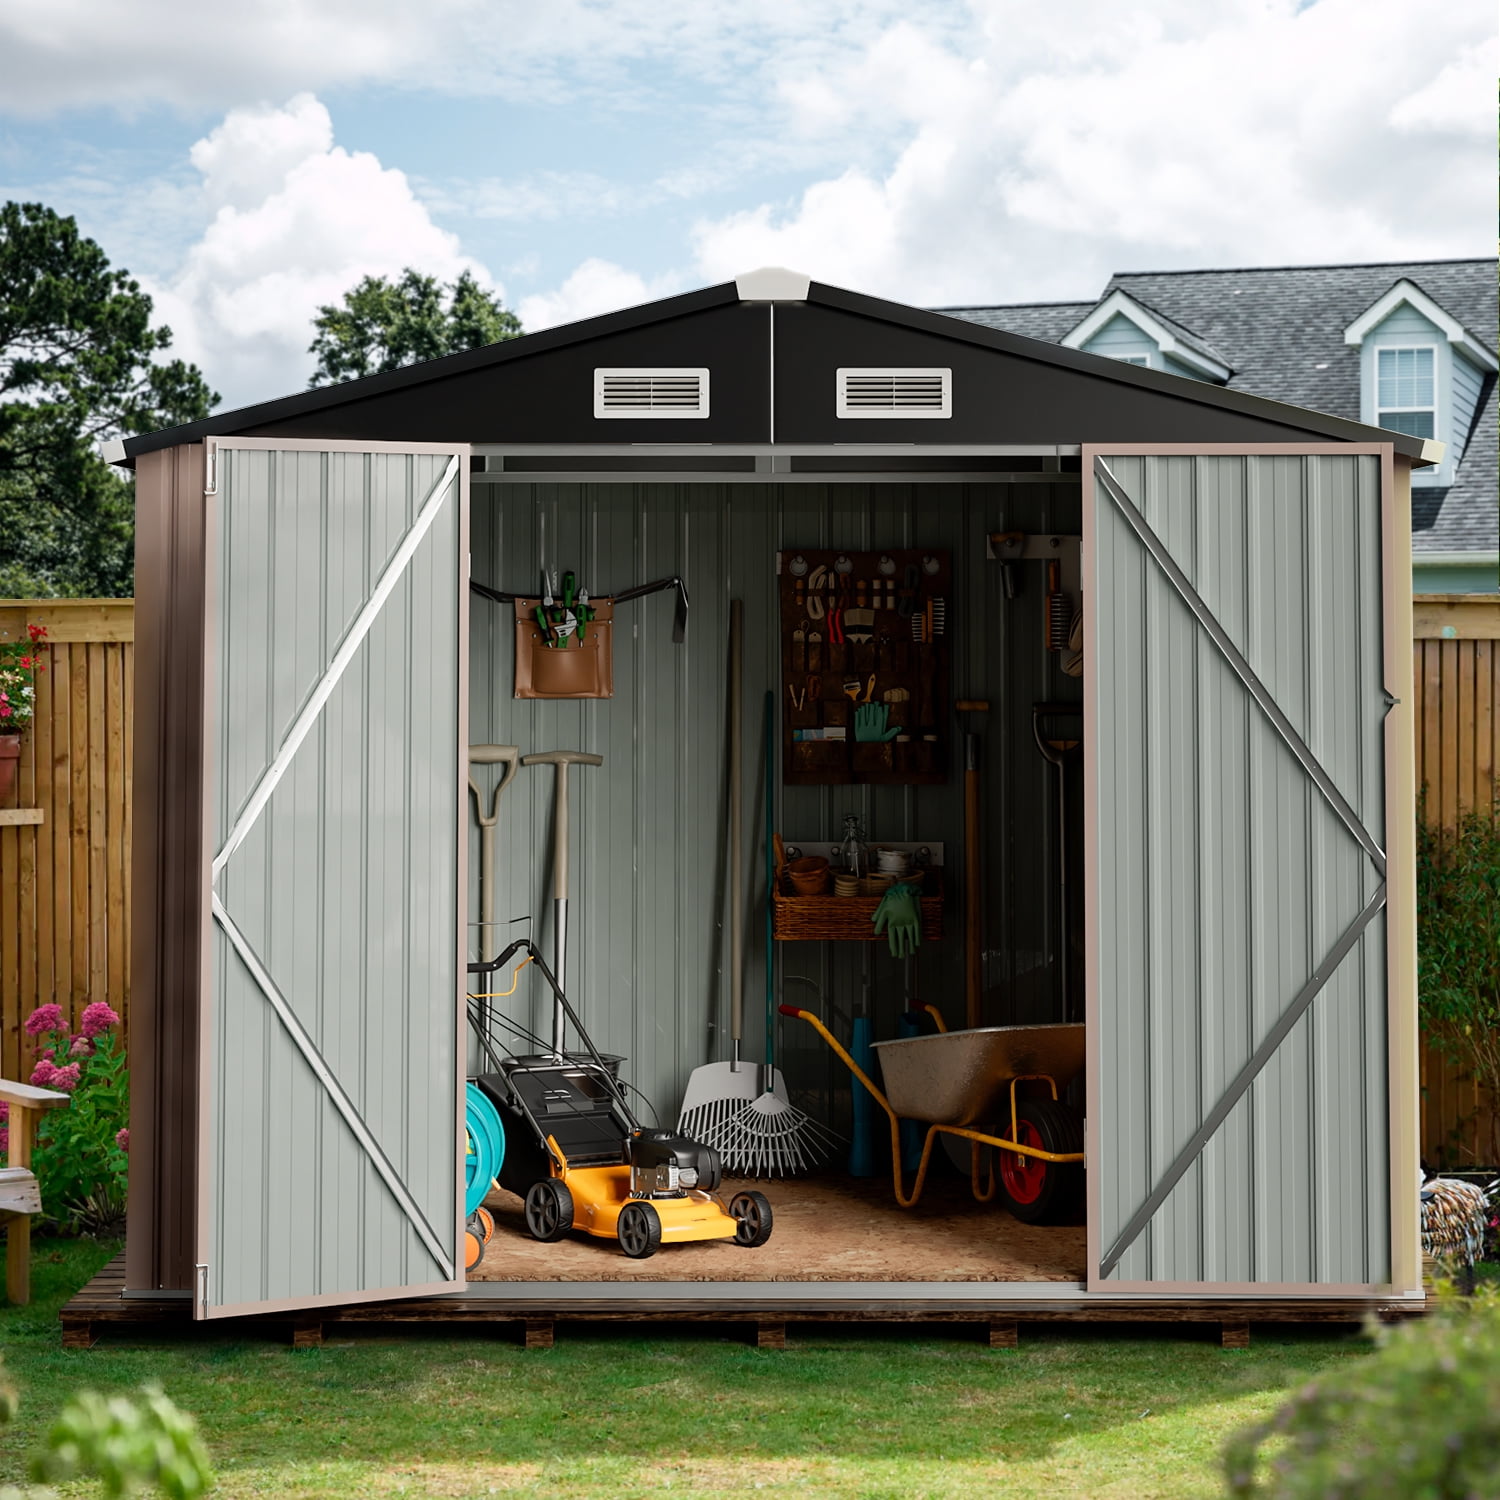 Gizoon 6' x 4' Outdoor Storage Shed with Double Lockable Doors,  Anti-Corrosion Metal Garden Shed with Base Frame, Waterproof Shed Outdoor  Storage